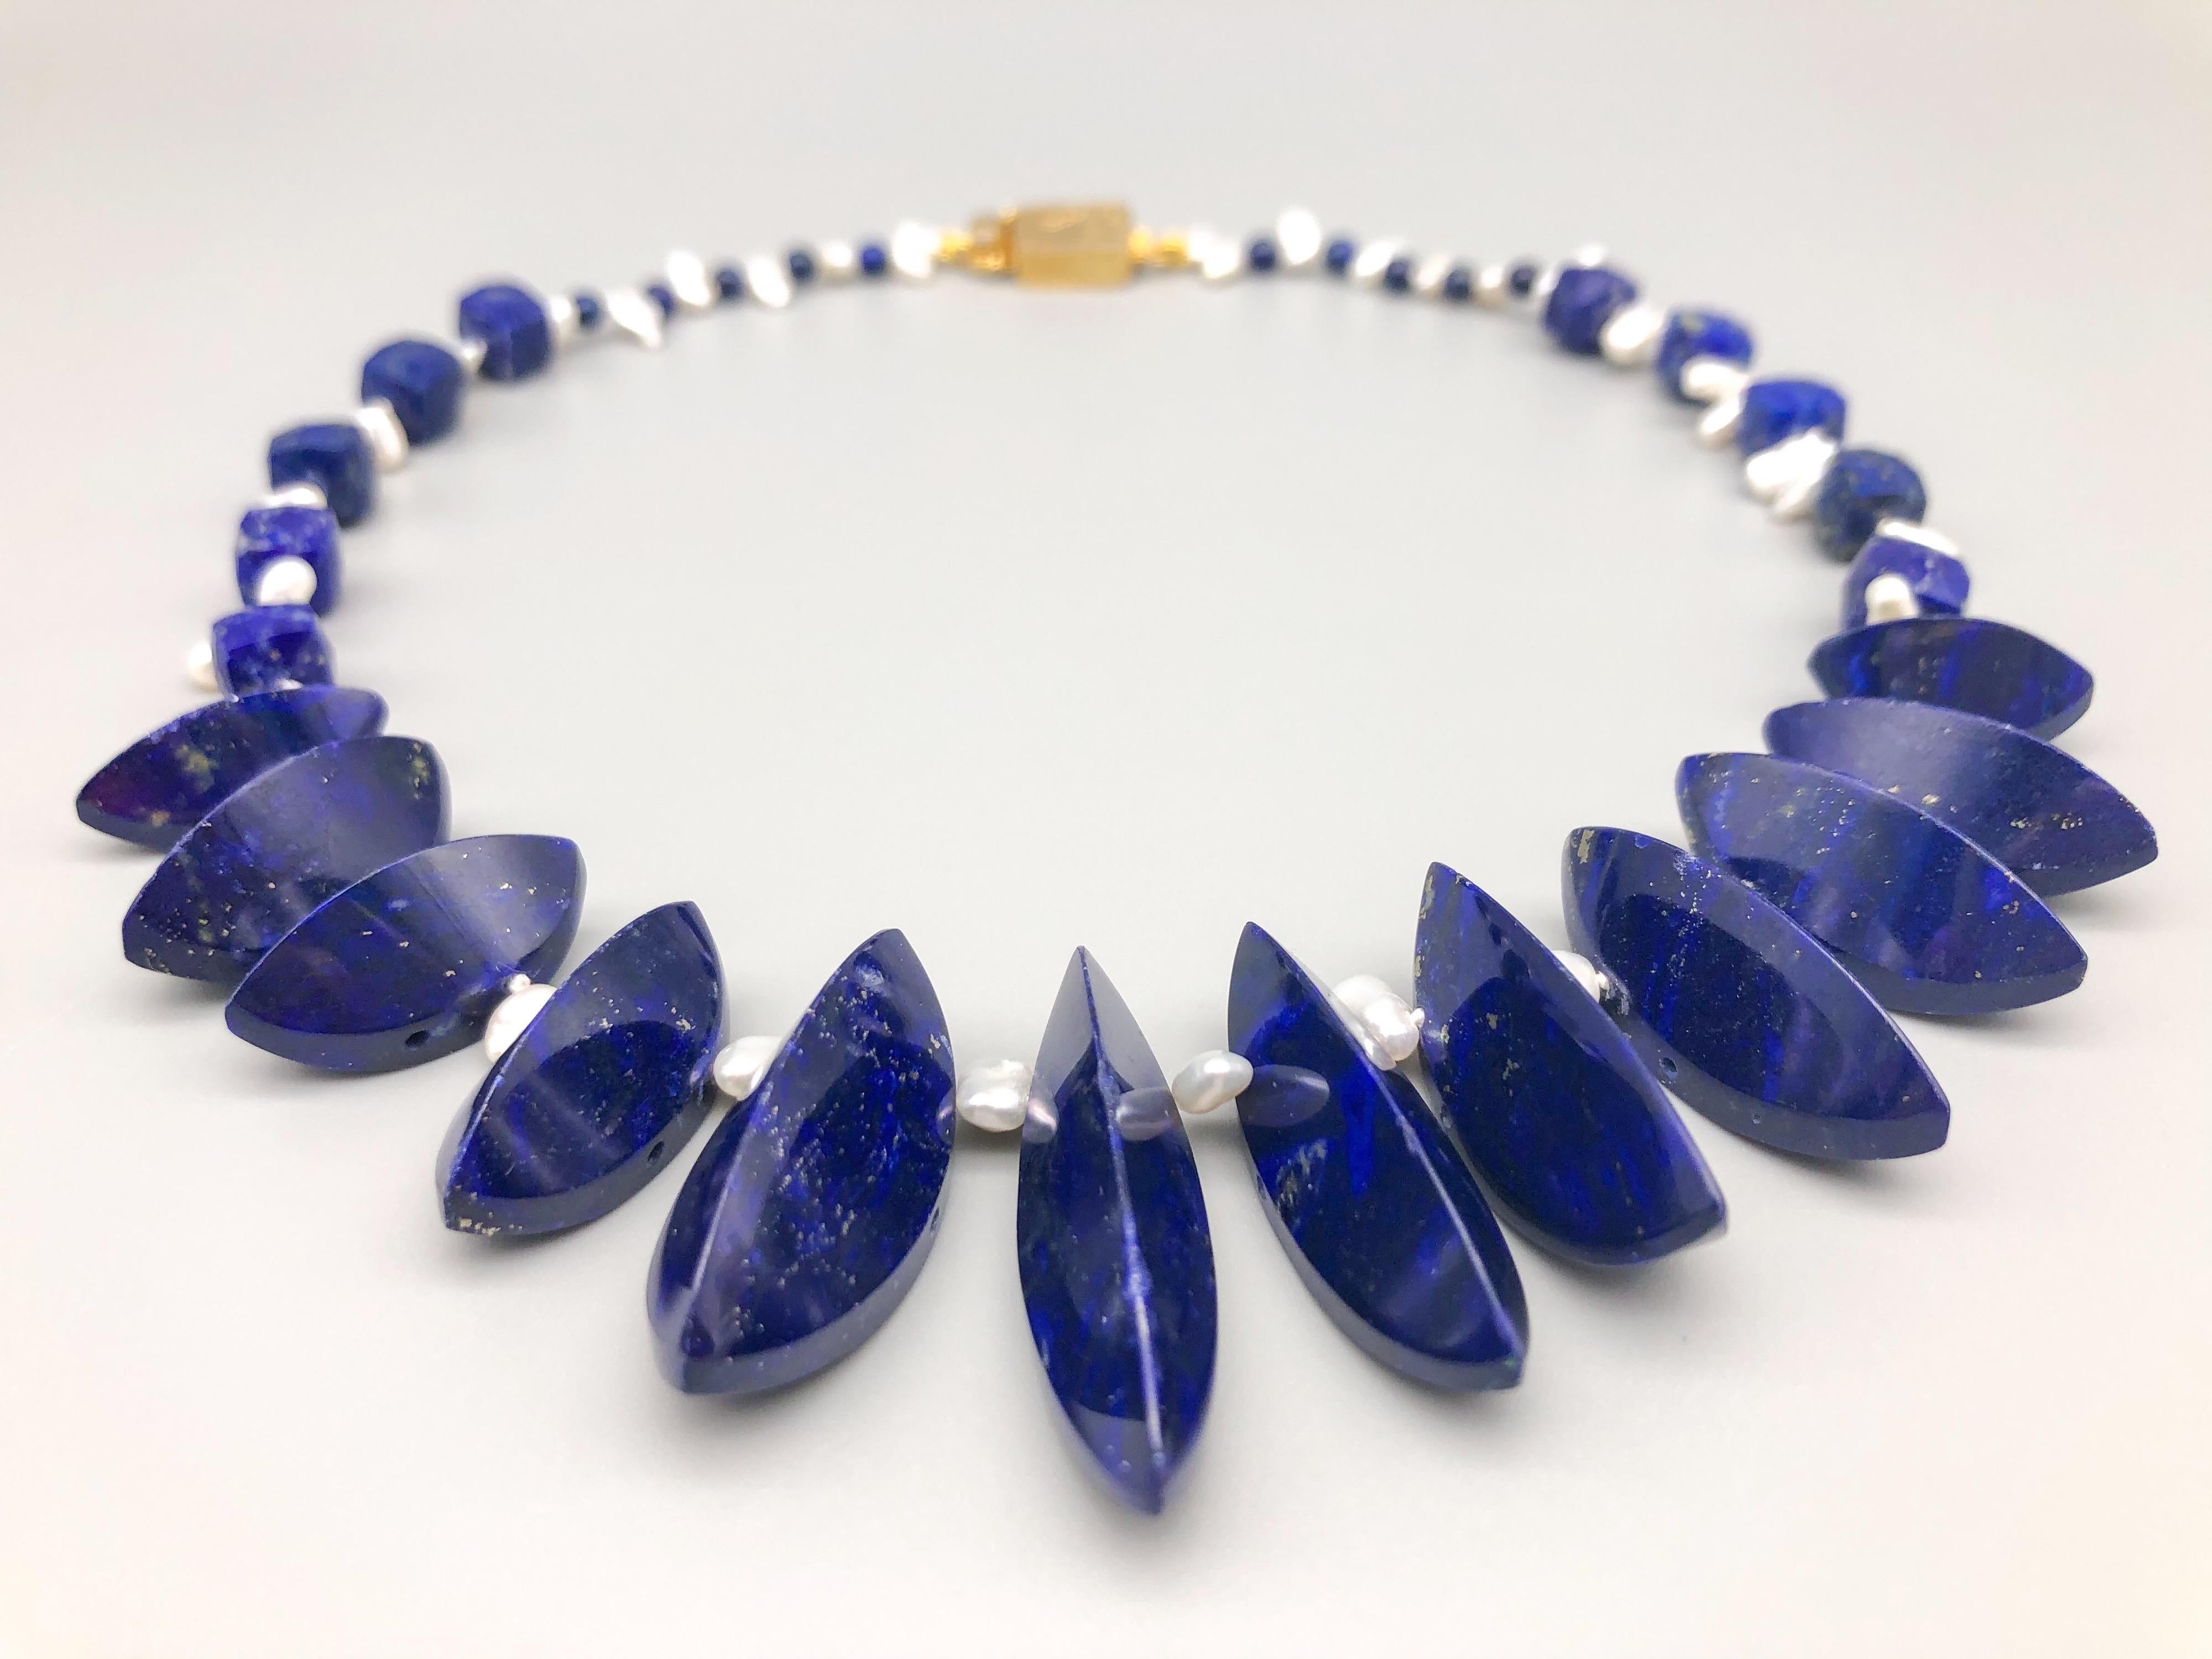 Mixed Cut A.Jeschel Unusually cut Lapis beads are strung in a flattering necklace. For Sale